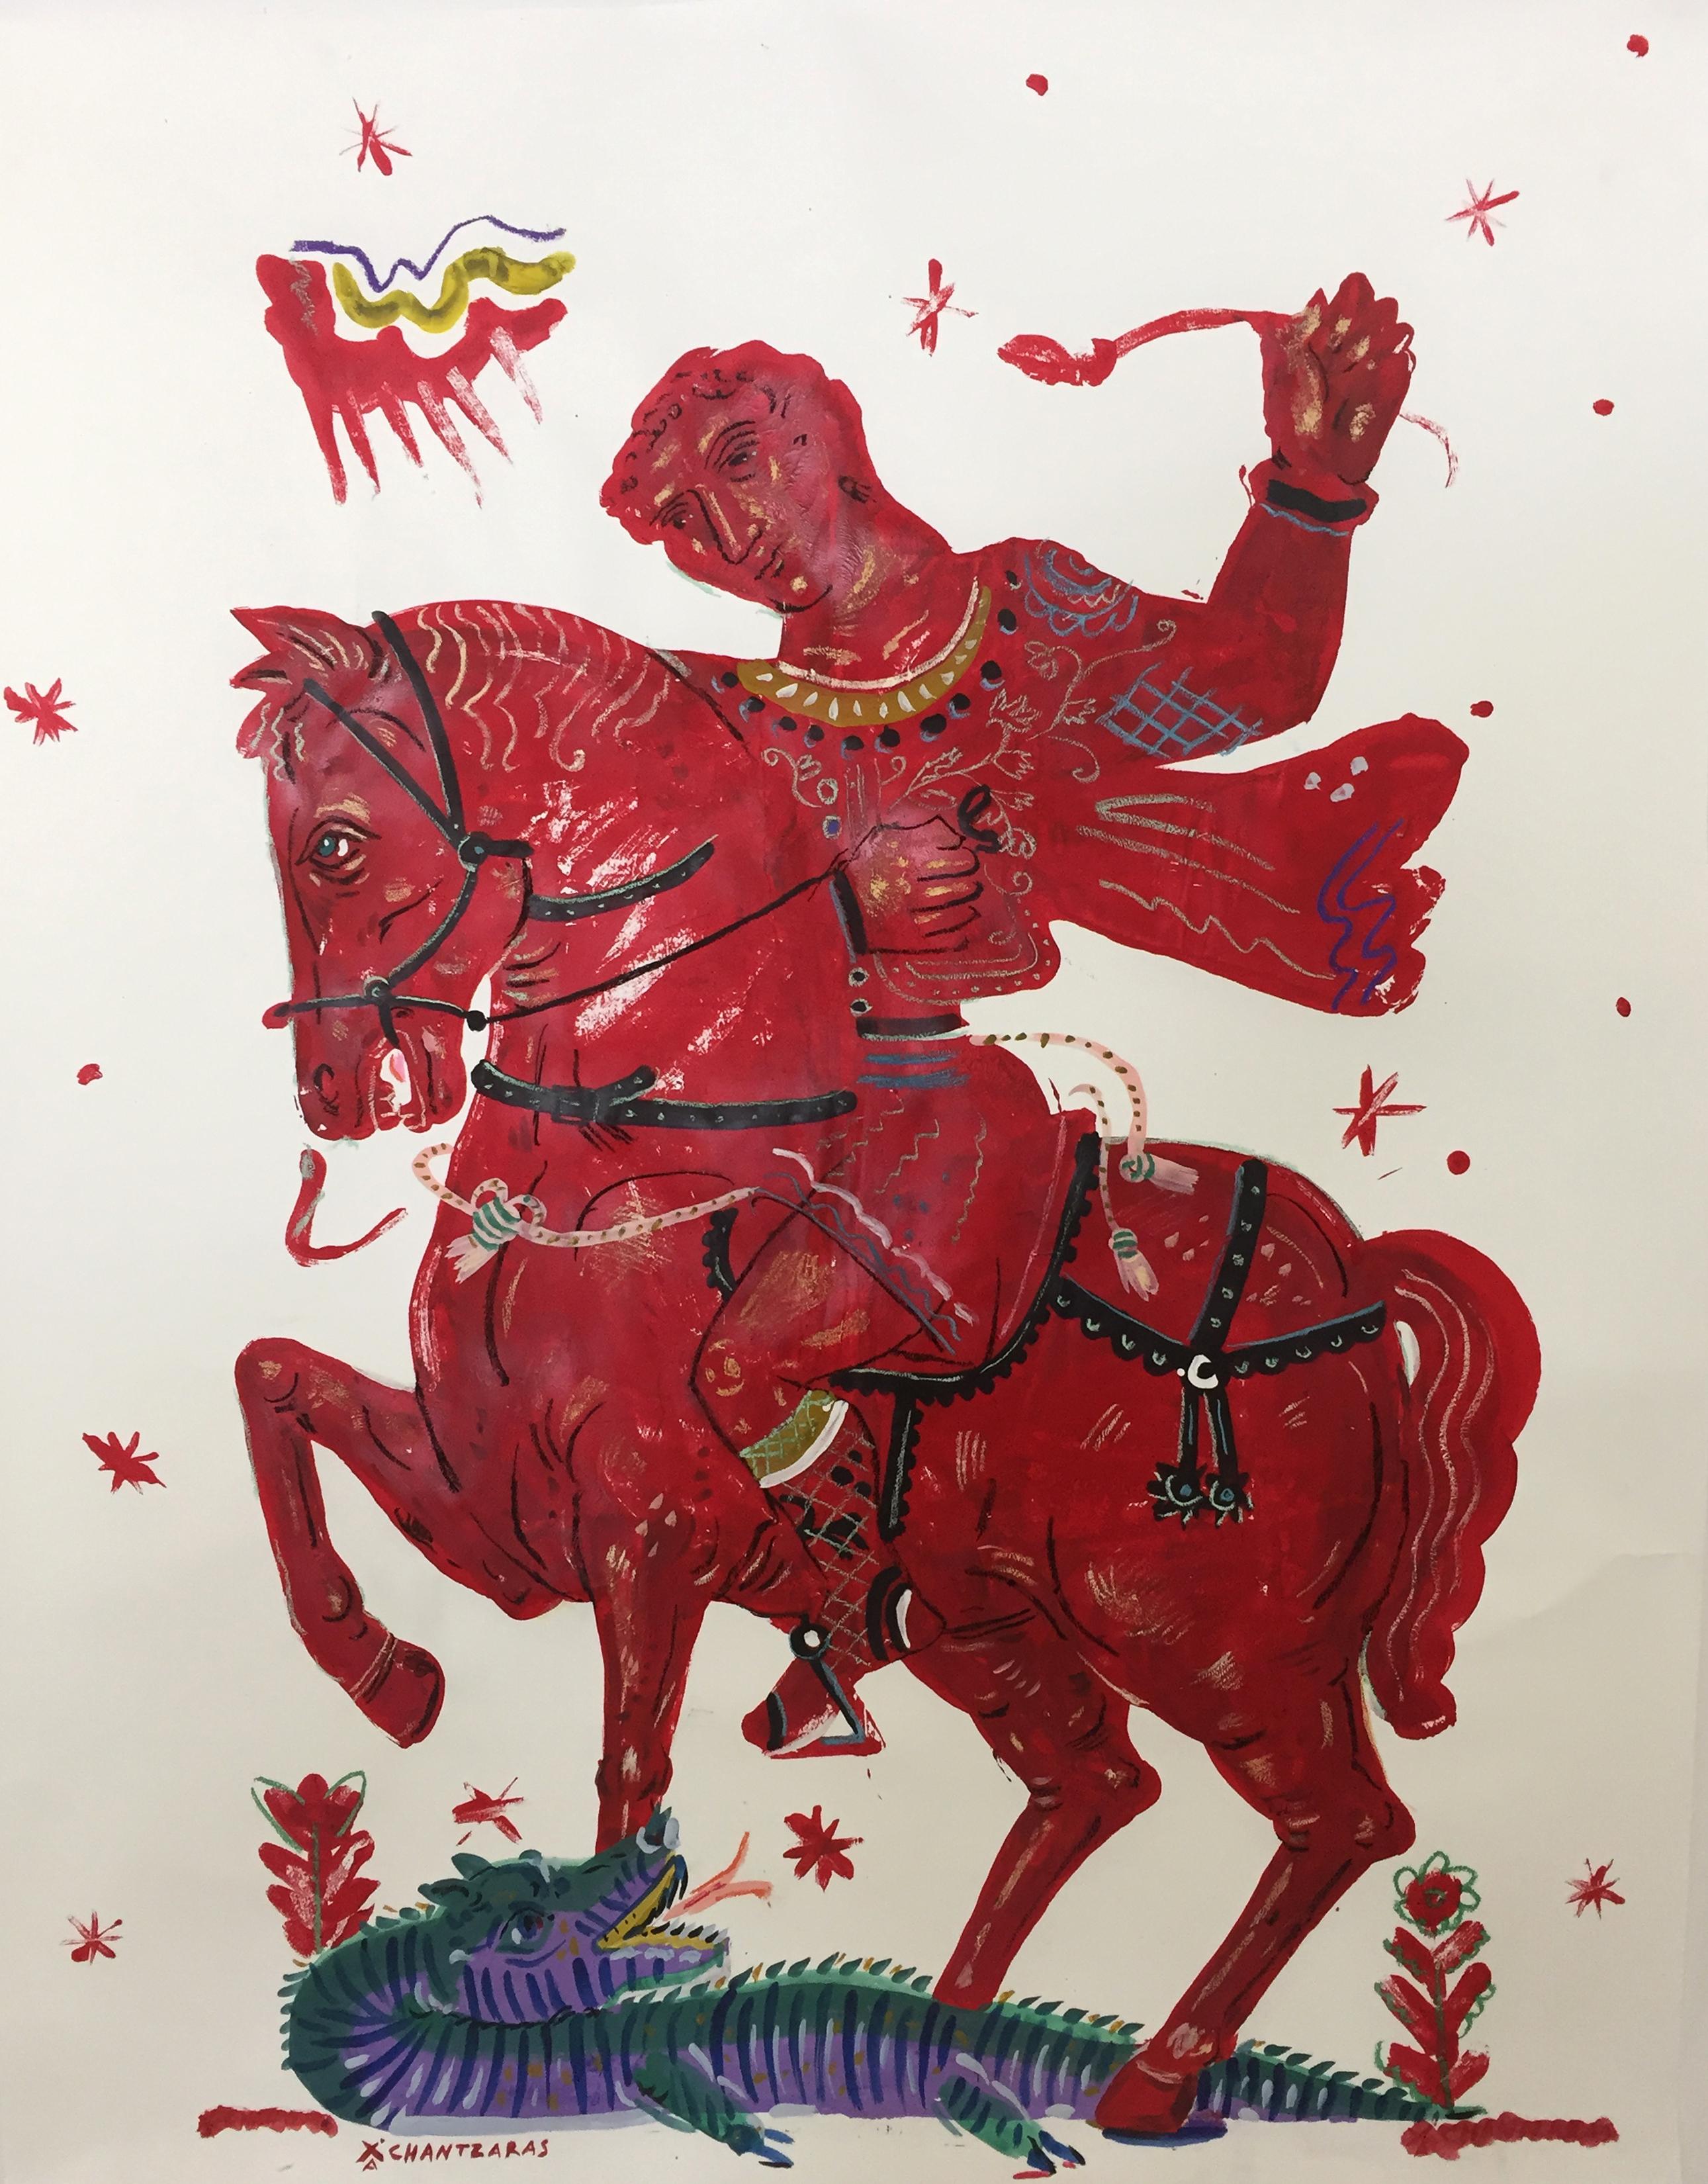 Victory and Romance, Mythological painting on paper with Red Rider and Horse